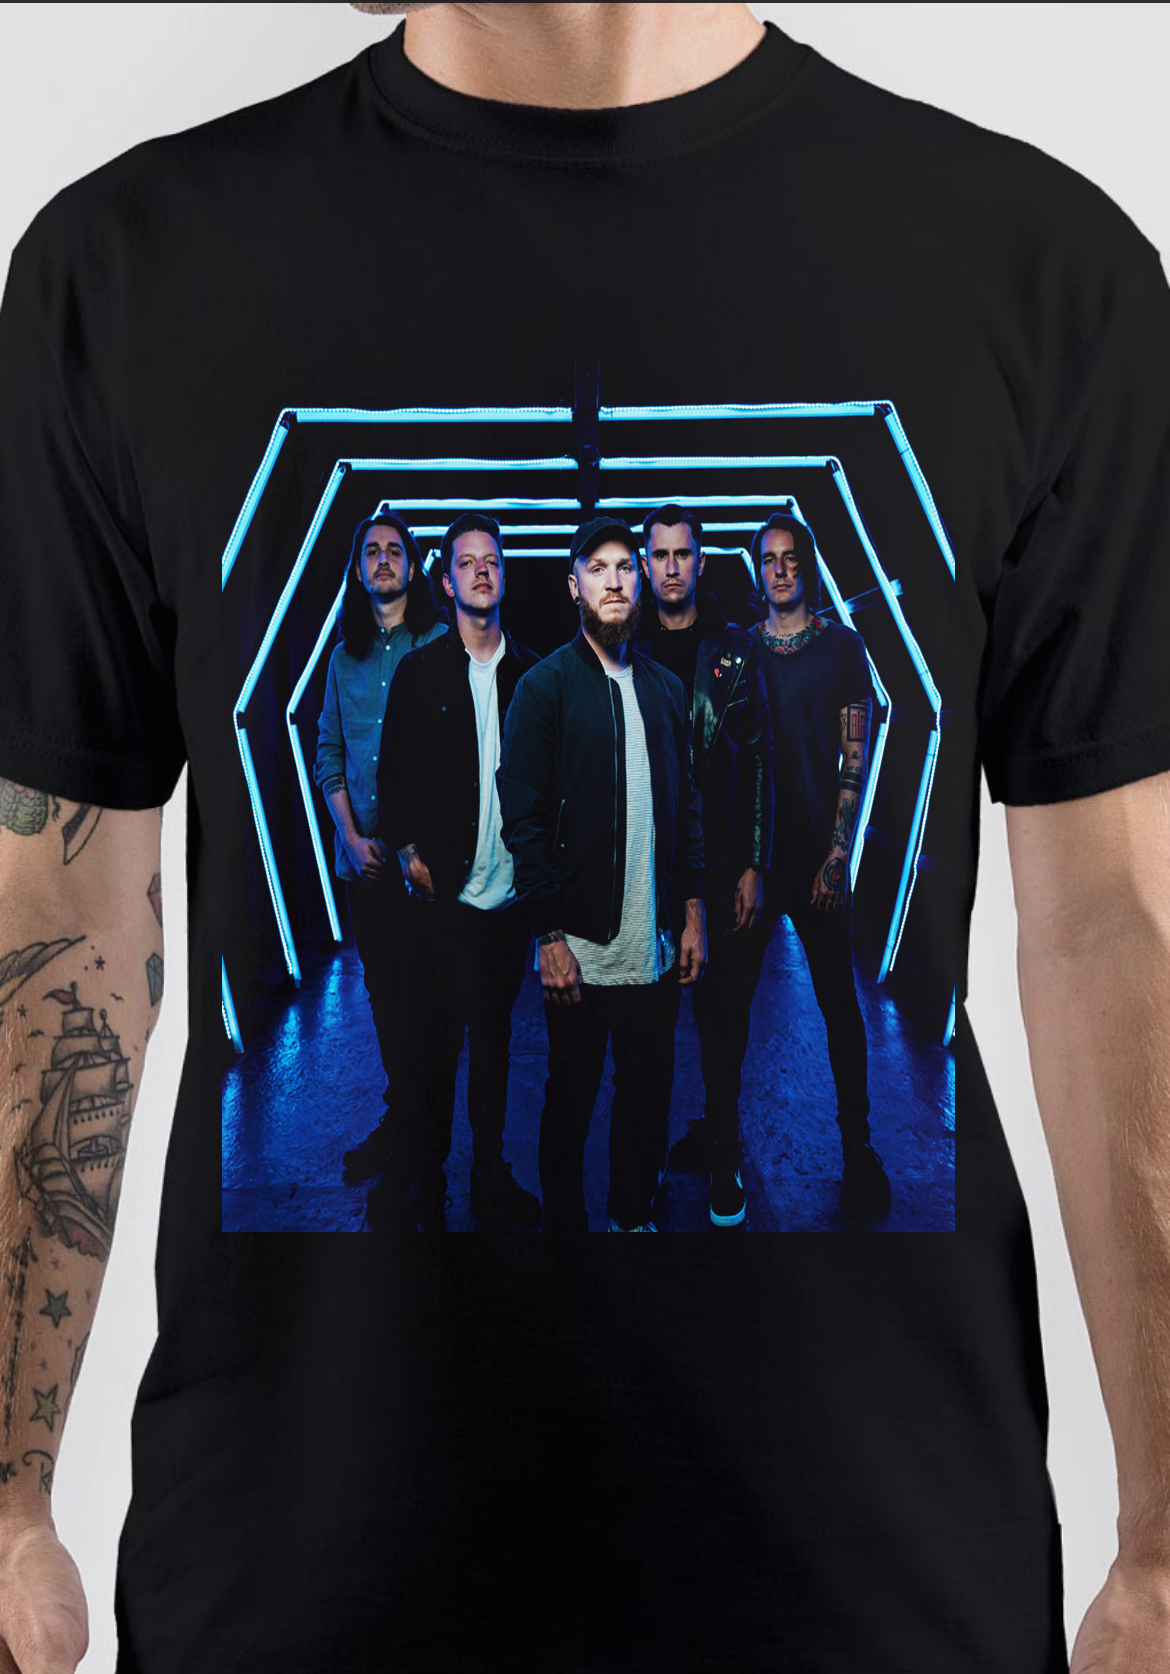 We Came As Romans T-Shirt And Merchandise